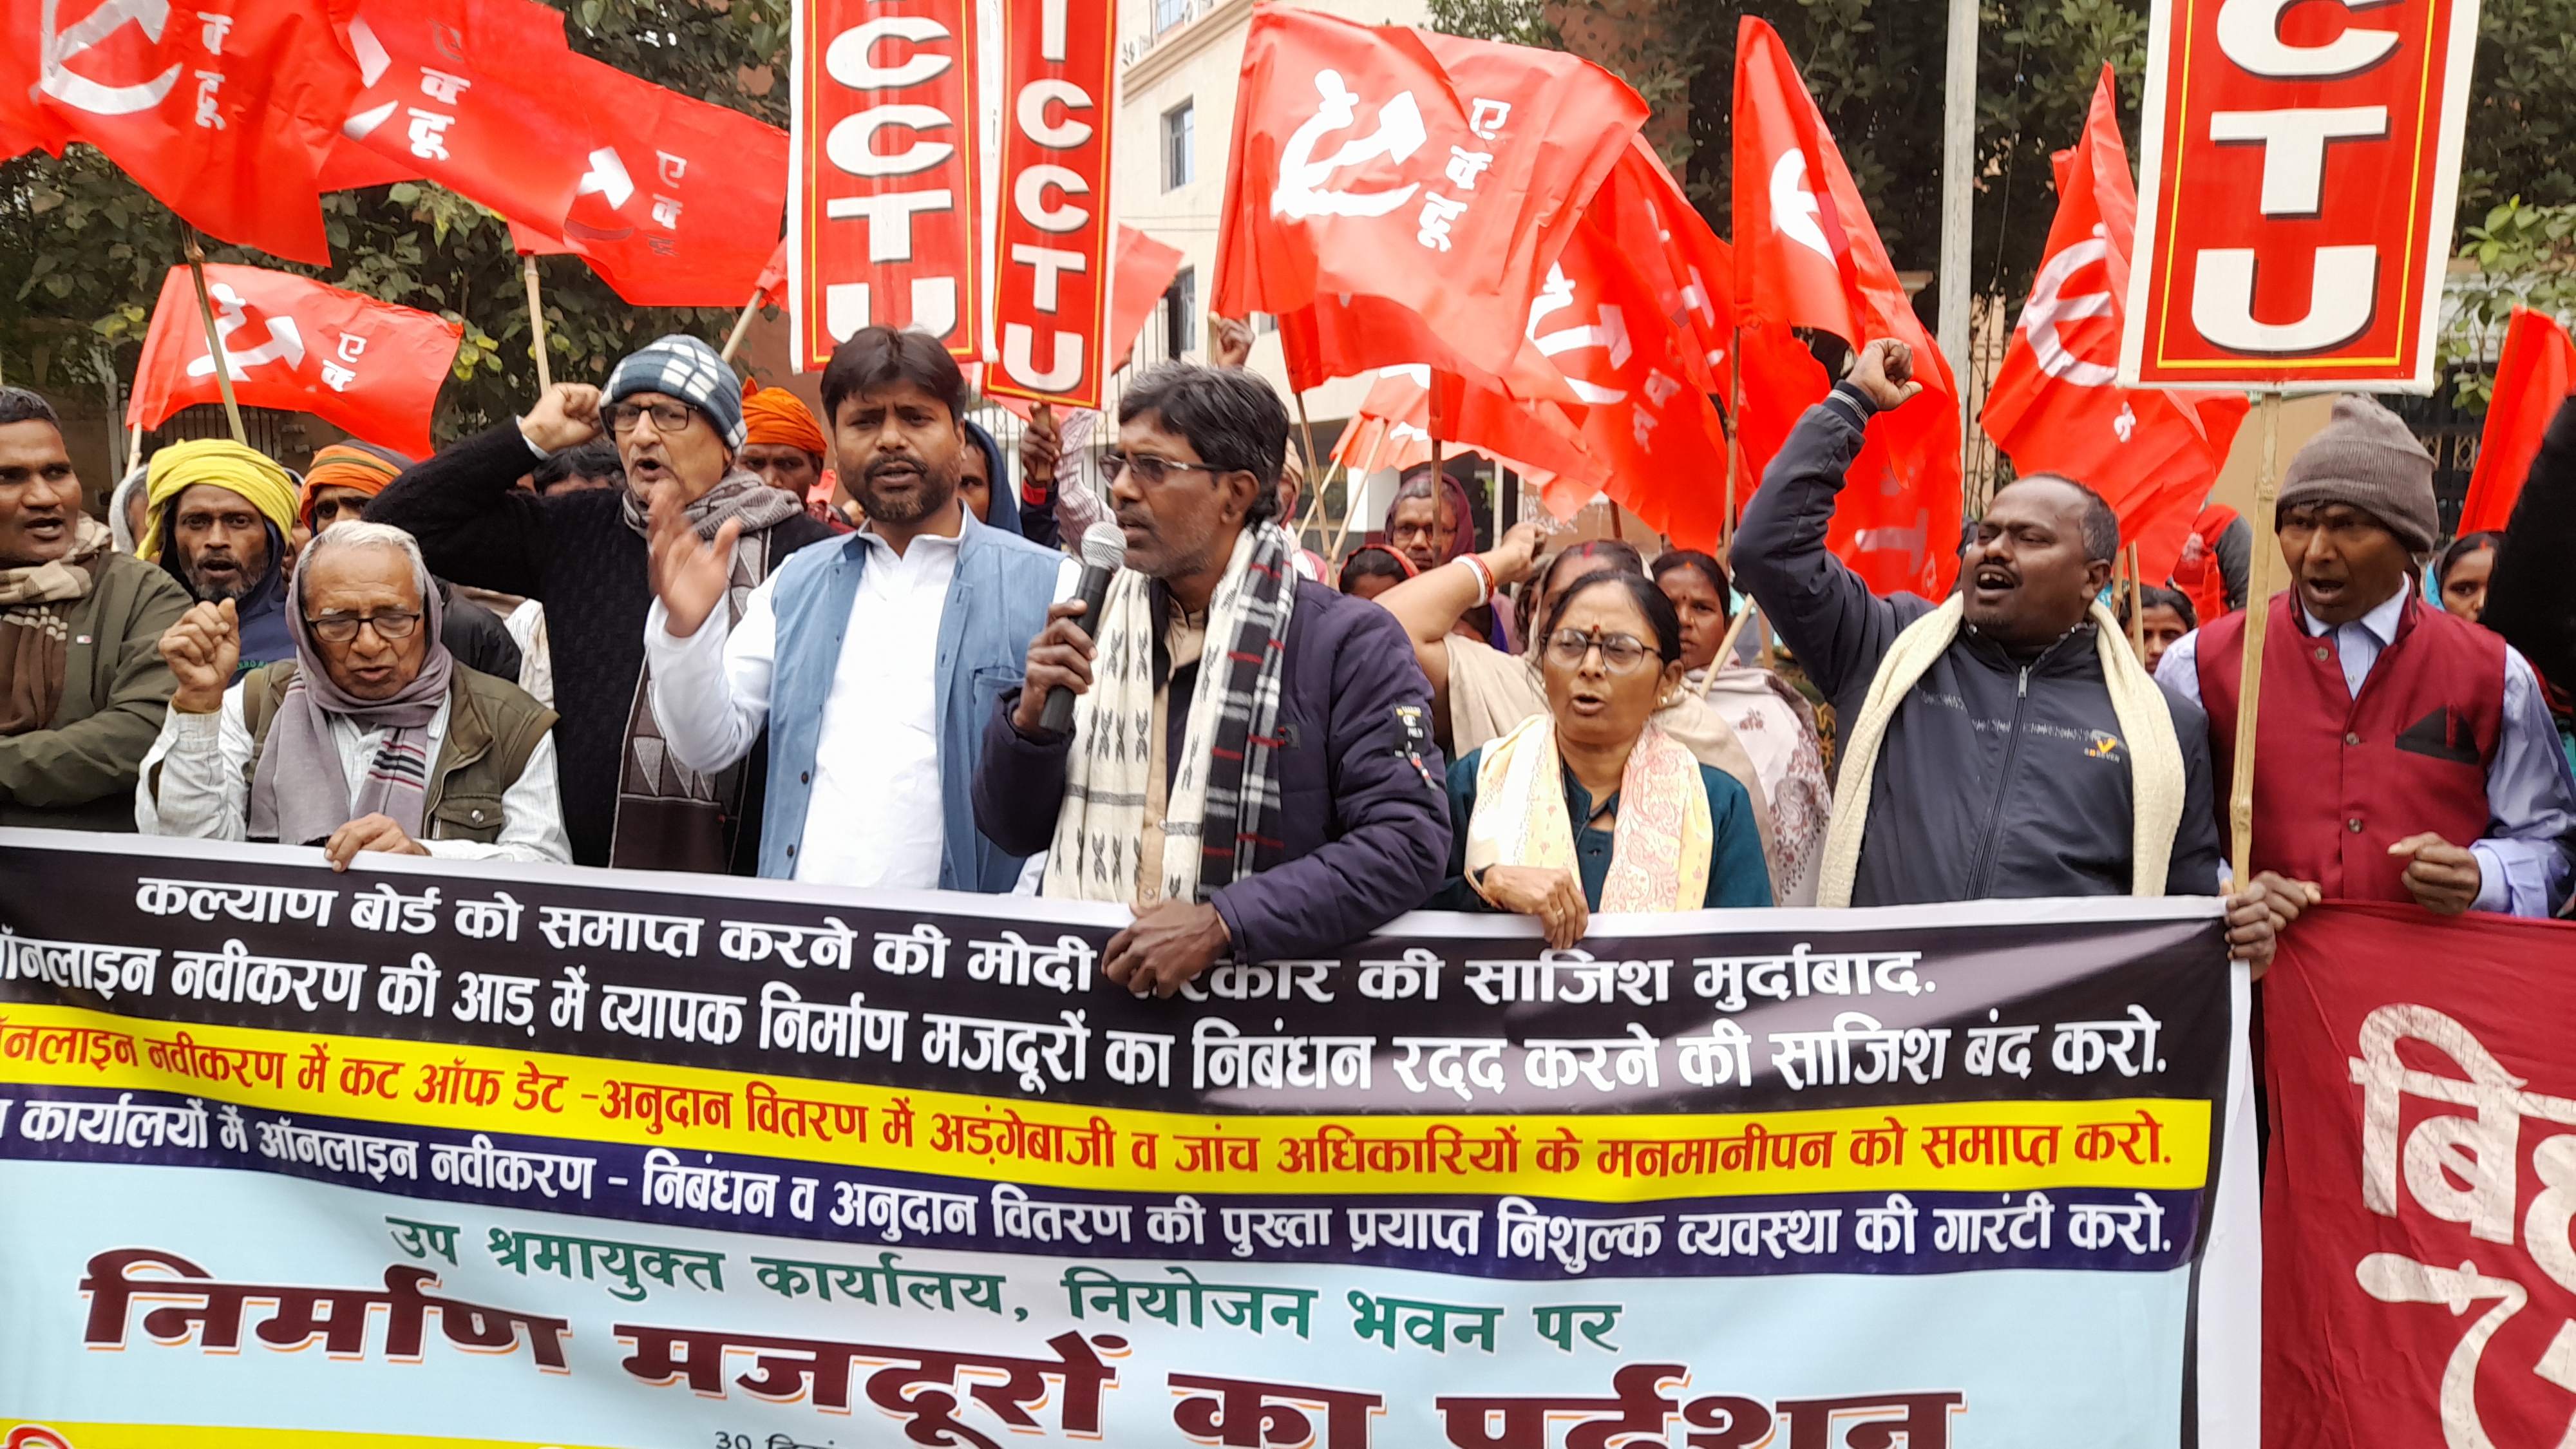 workers demonstration